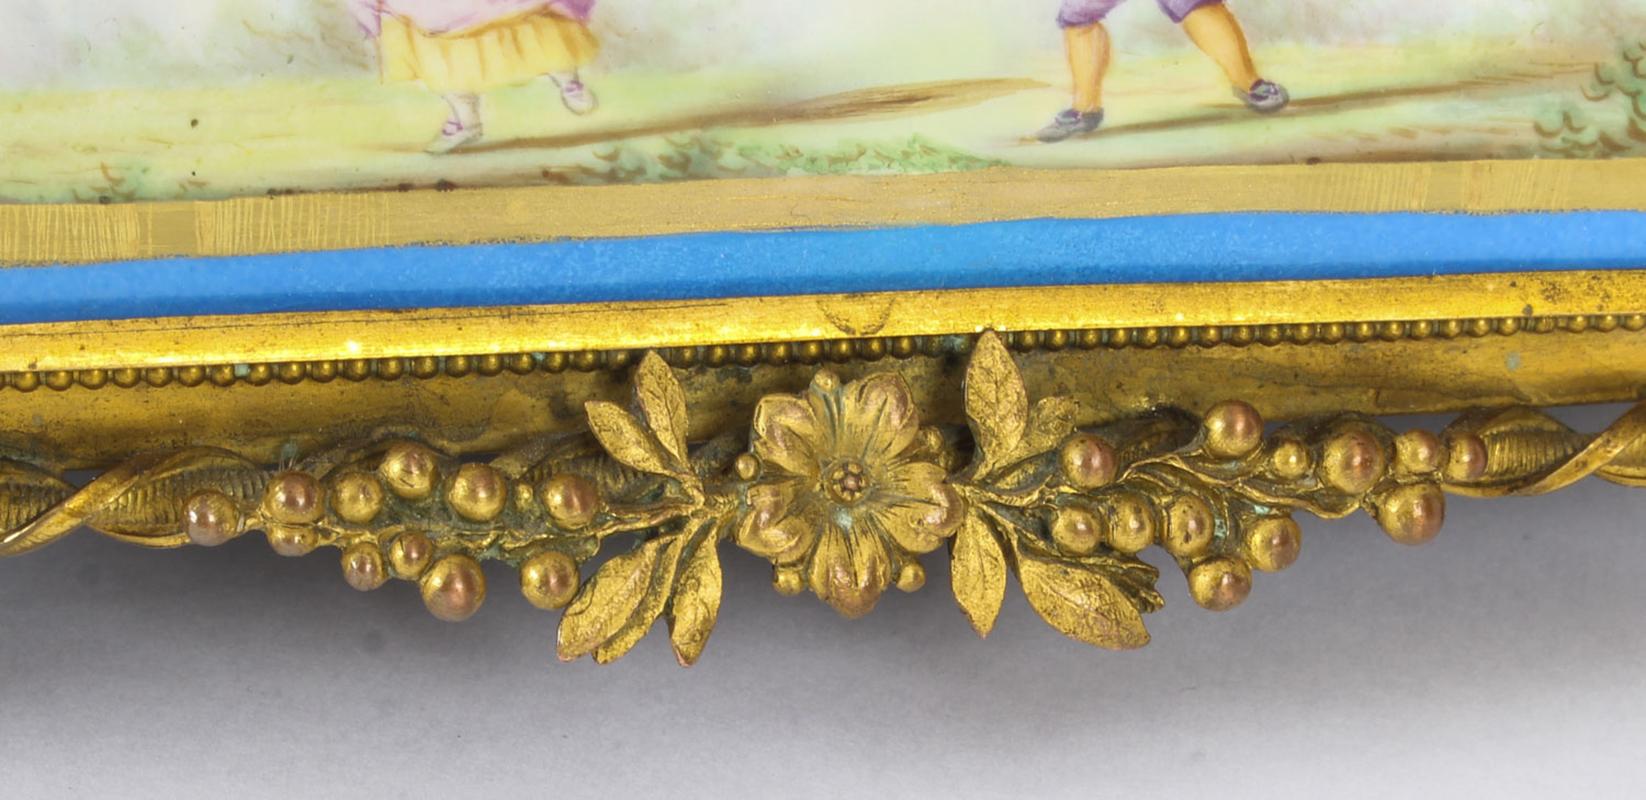 Antique French Sevres Porcelain and Ormolu Jewellery Casket 19th Century  For Sale 1